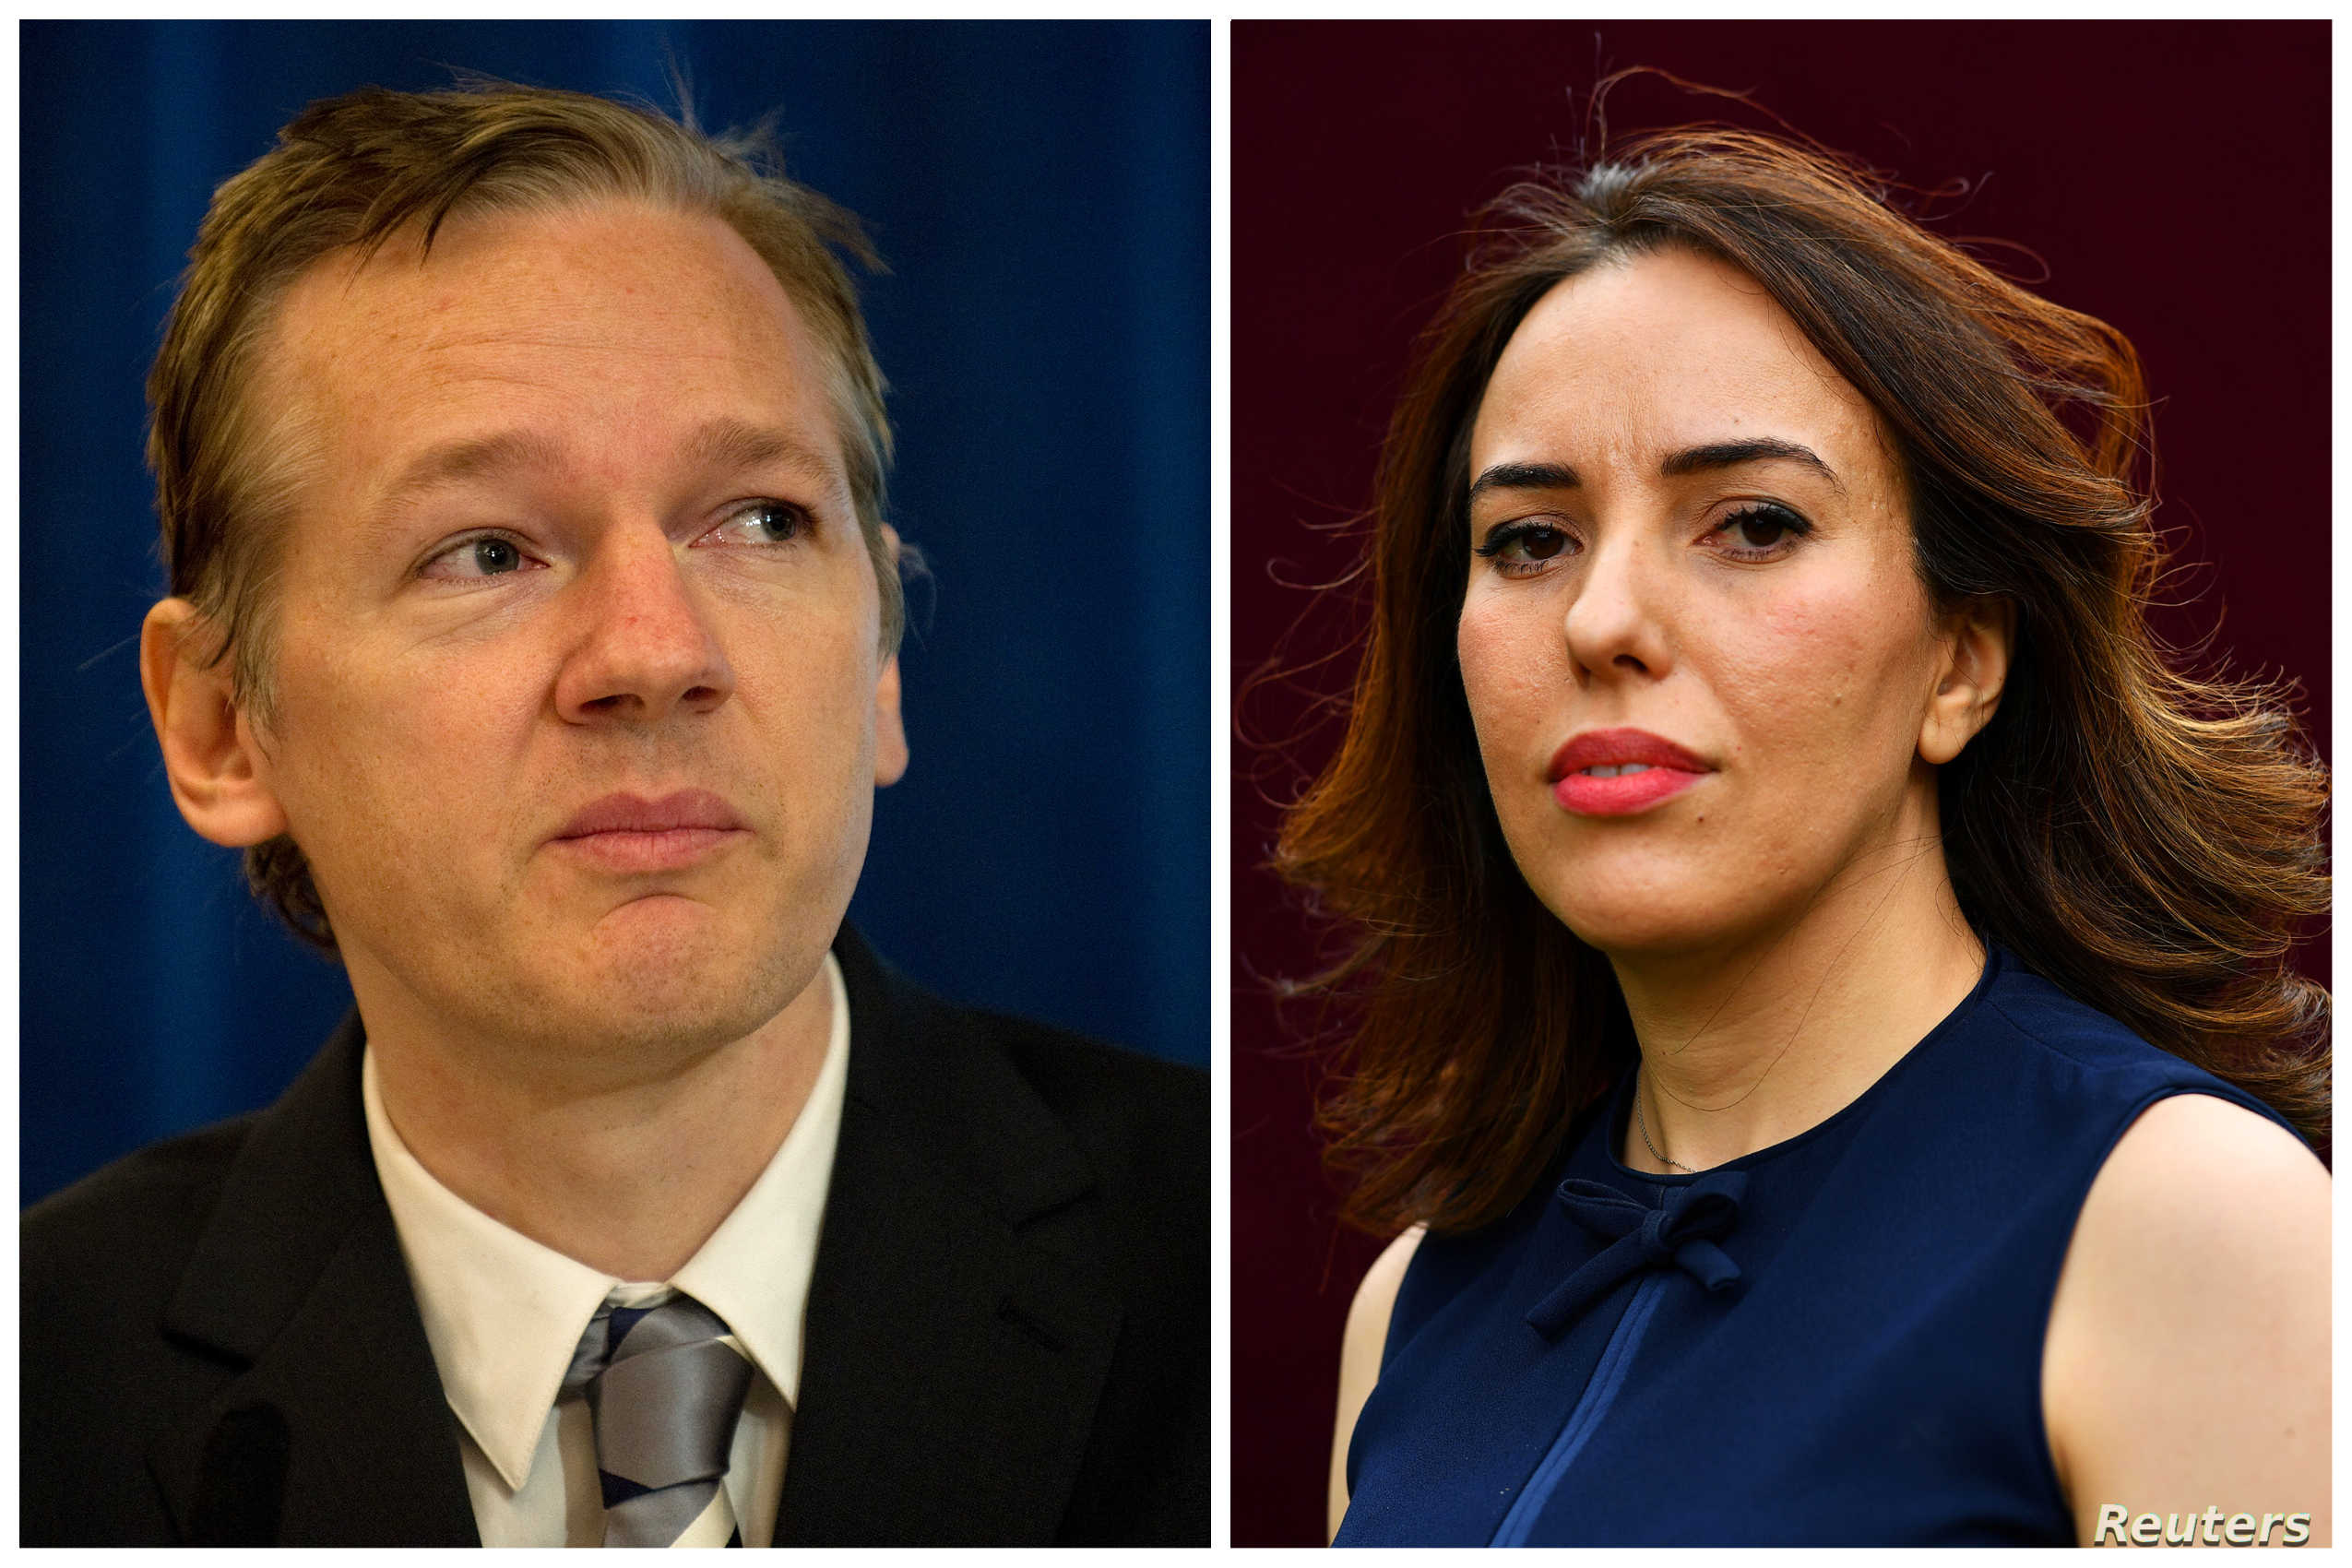 Julian Assange's Wife Urges US President Biden to Pardon her Husband, as Extradition Looms